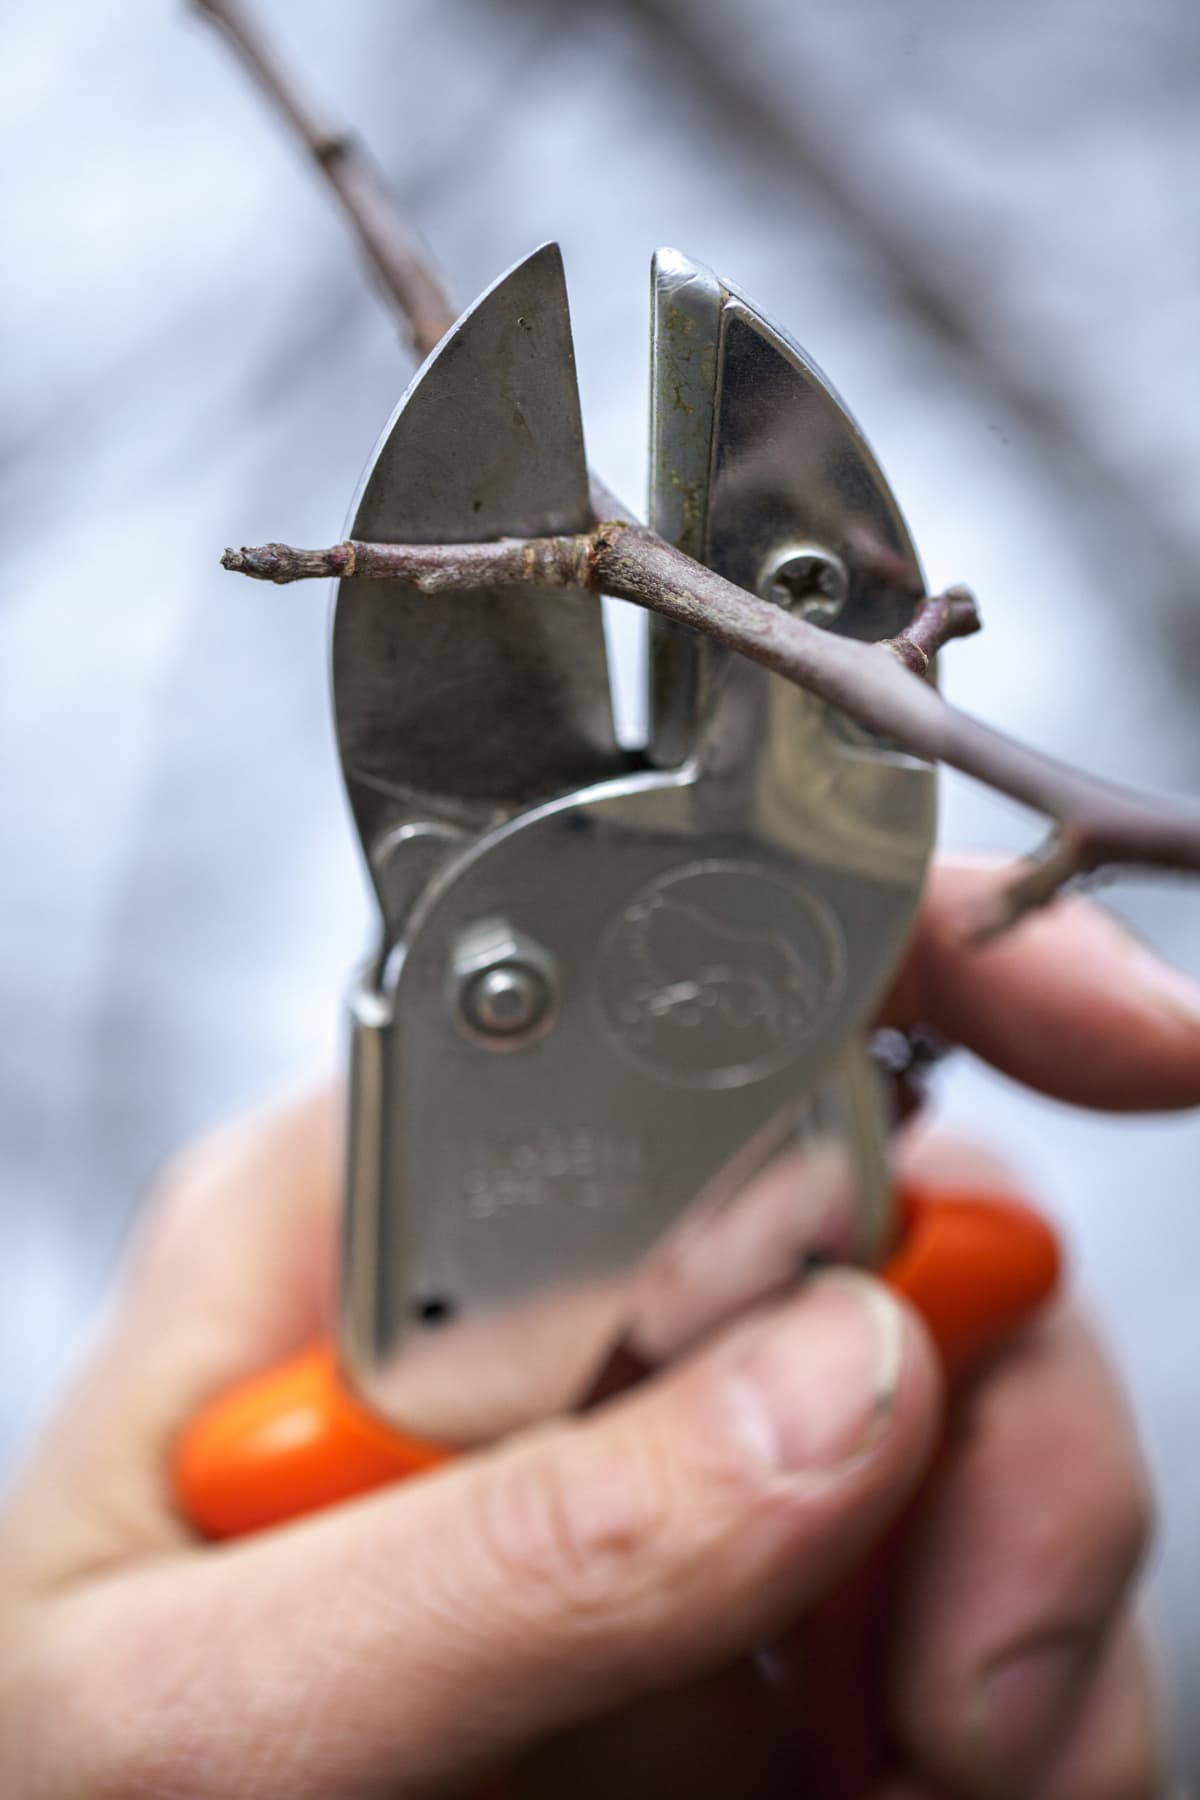 A person pruning a tree with shears